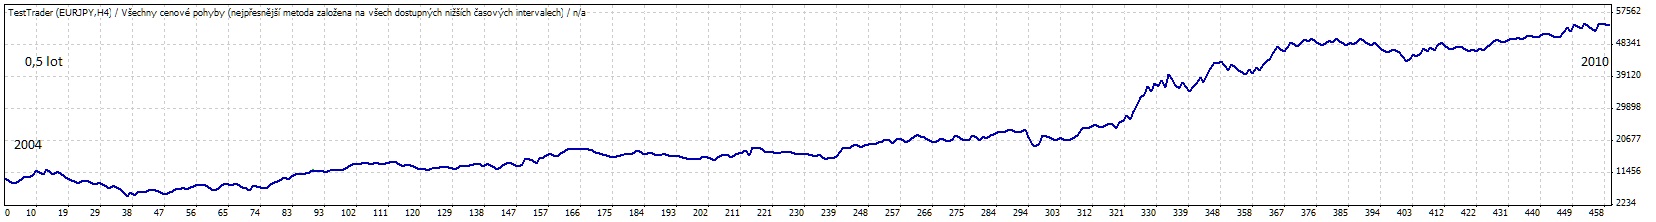 EURJPY equity